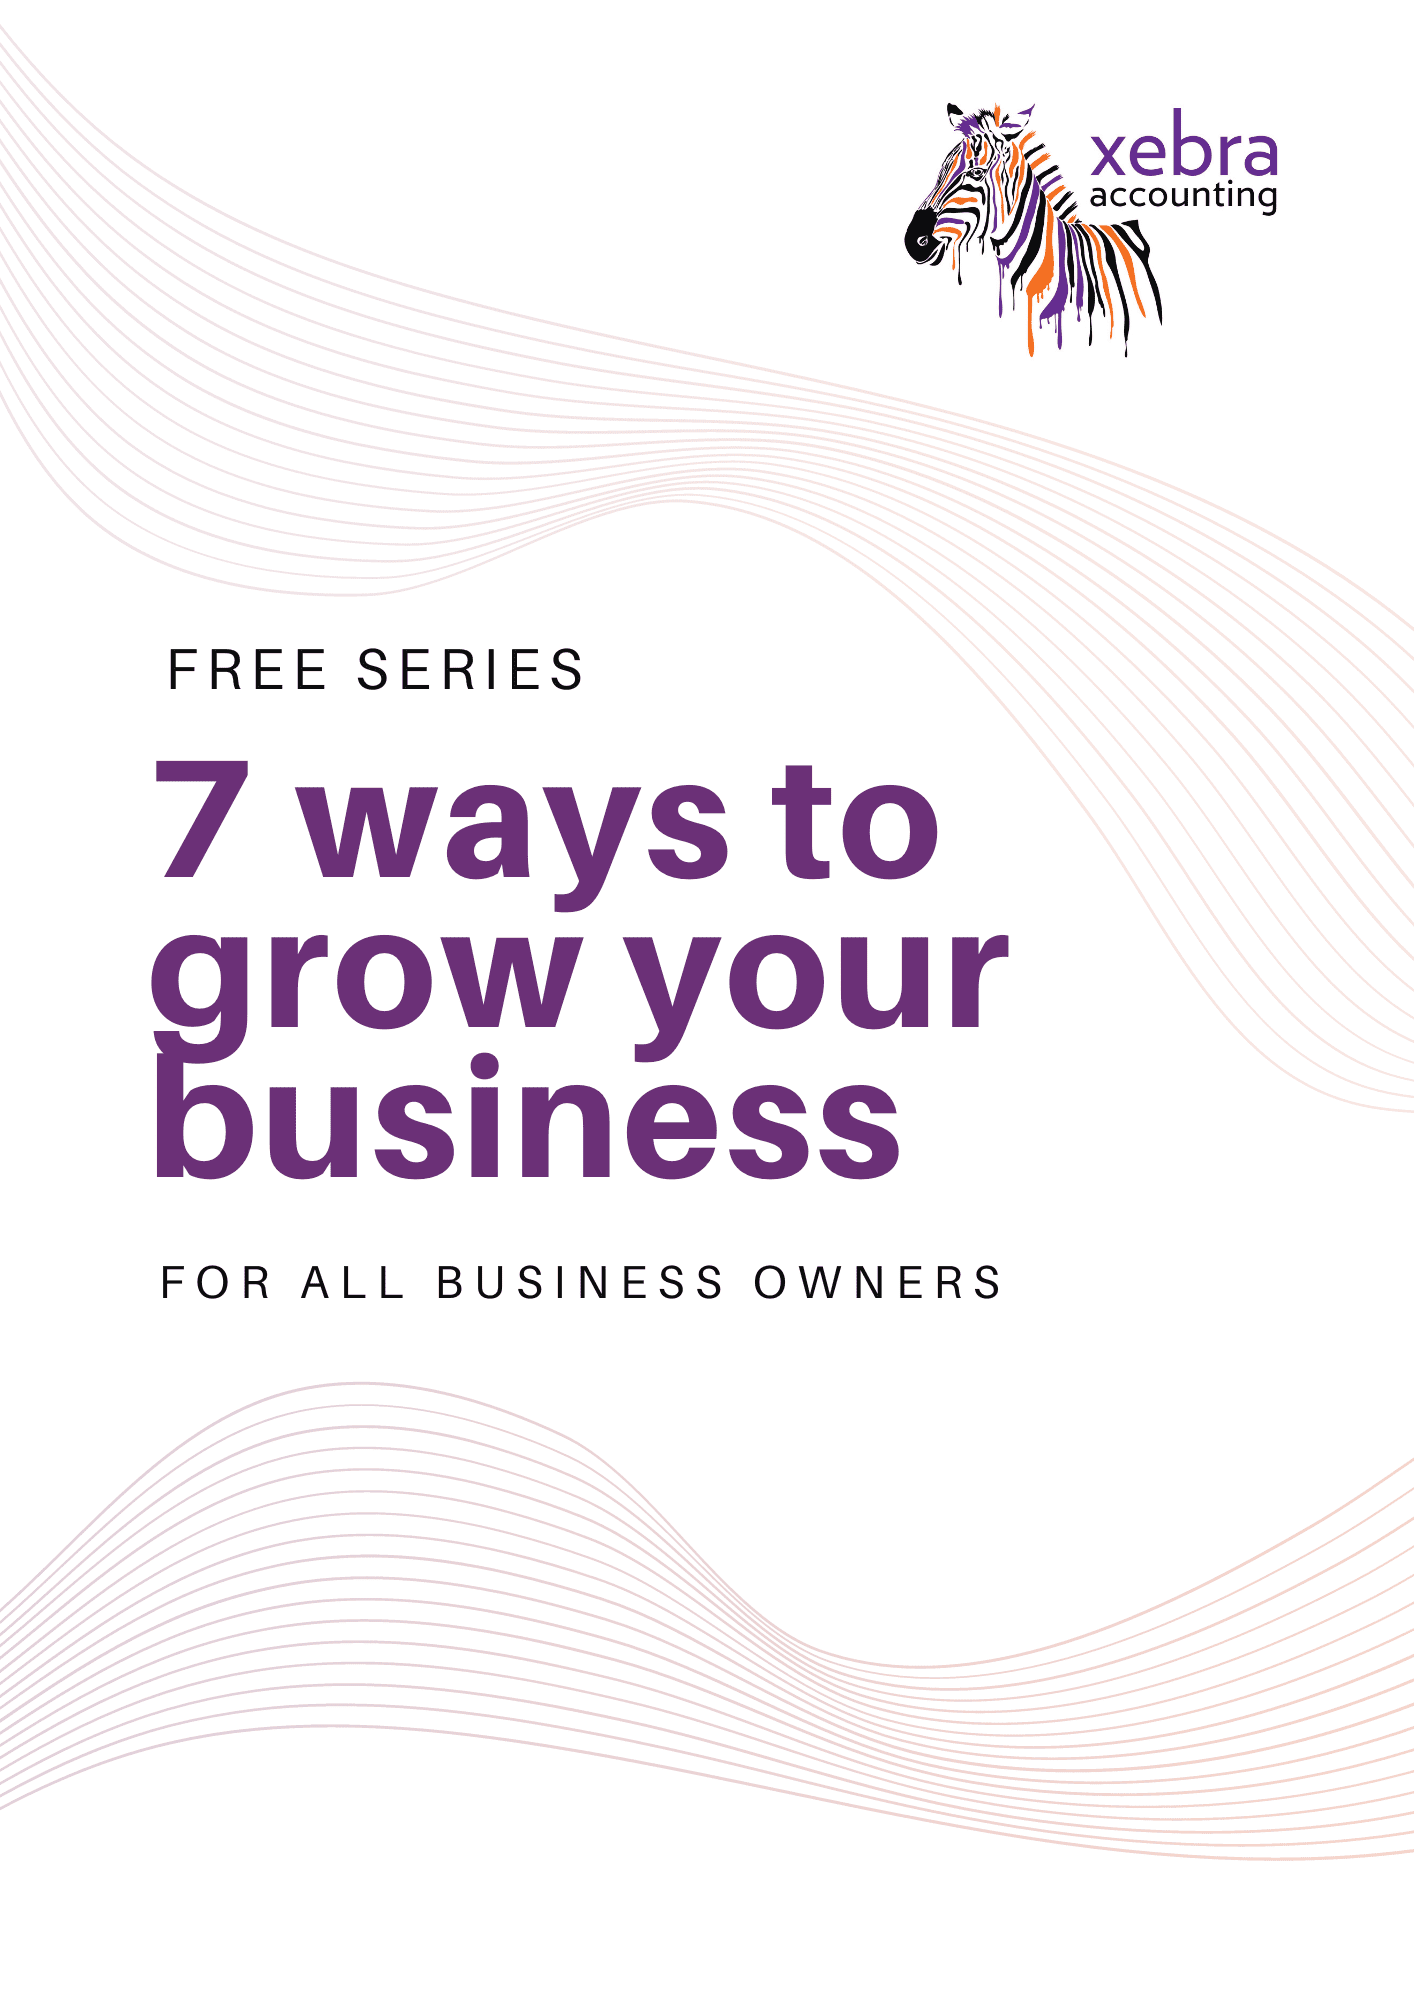 Xebra Accounting | Guides & Templates | 7 ways to grow your business